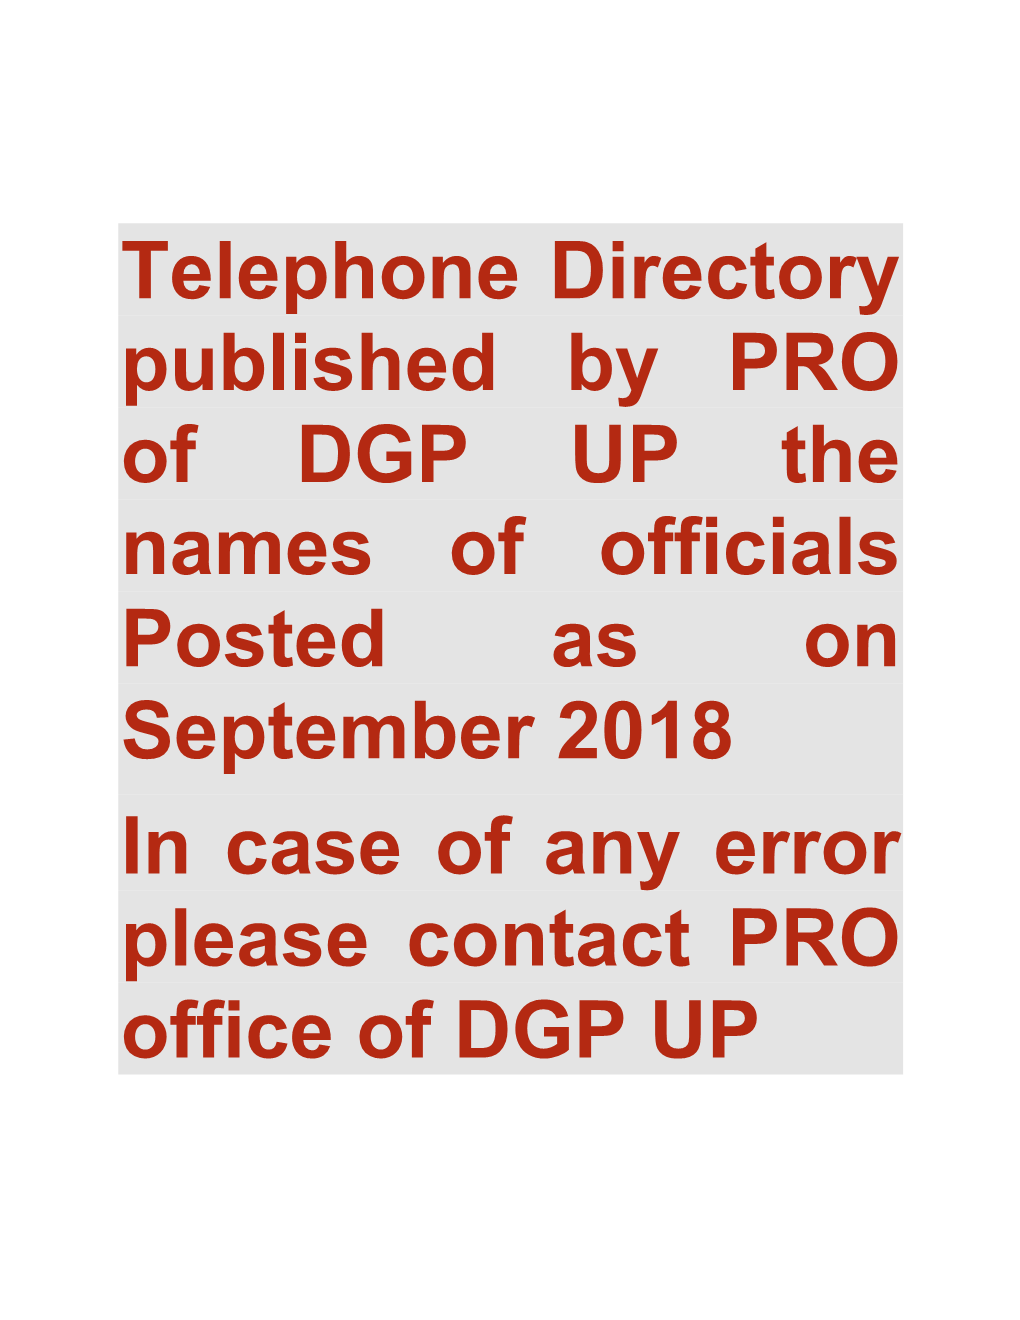 Telephone Directory Published by PRO of DGP up the Names of Officials Posted As on September 2018 in Case of Any Error Please Contact PRO Office of DGP UP